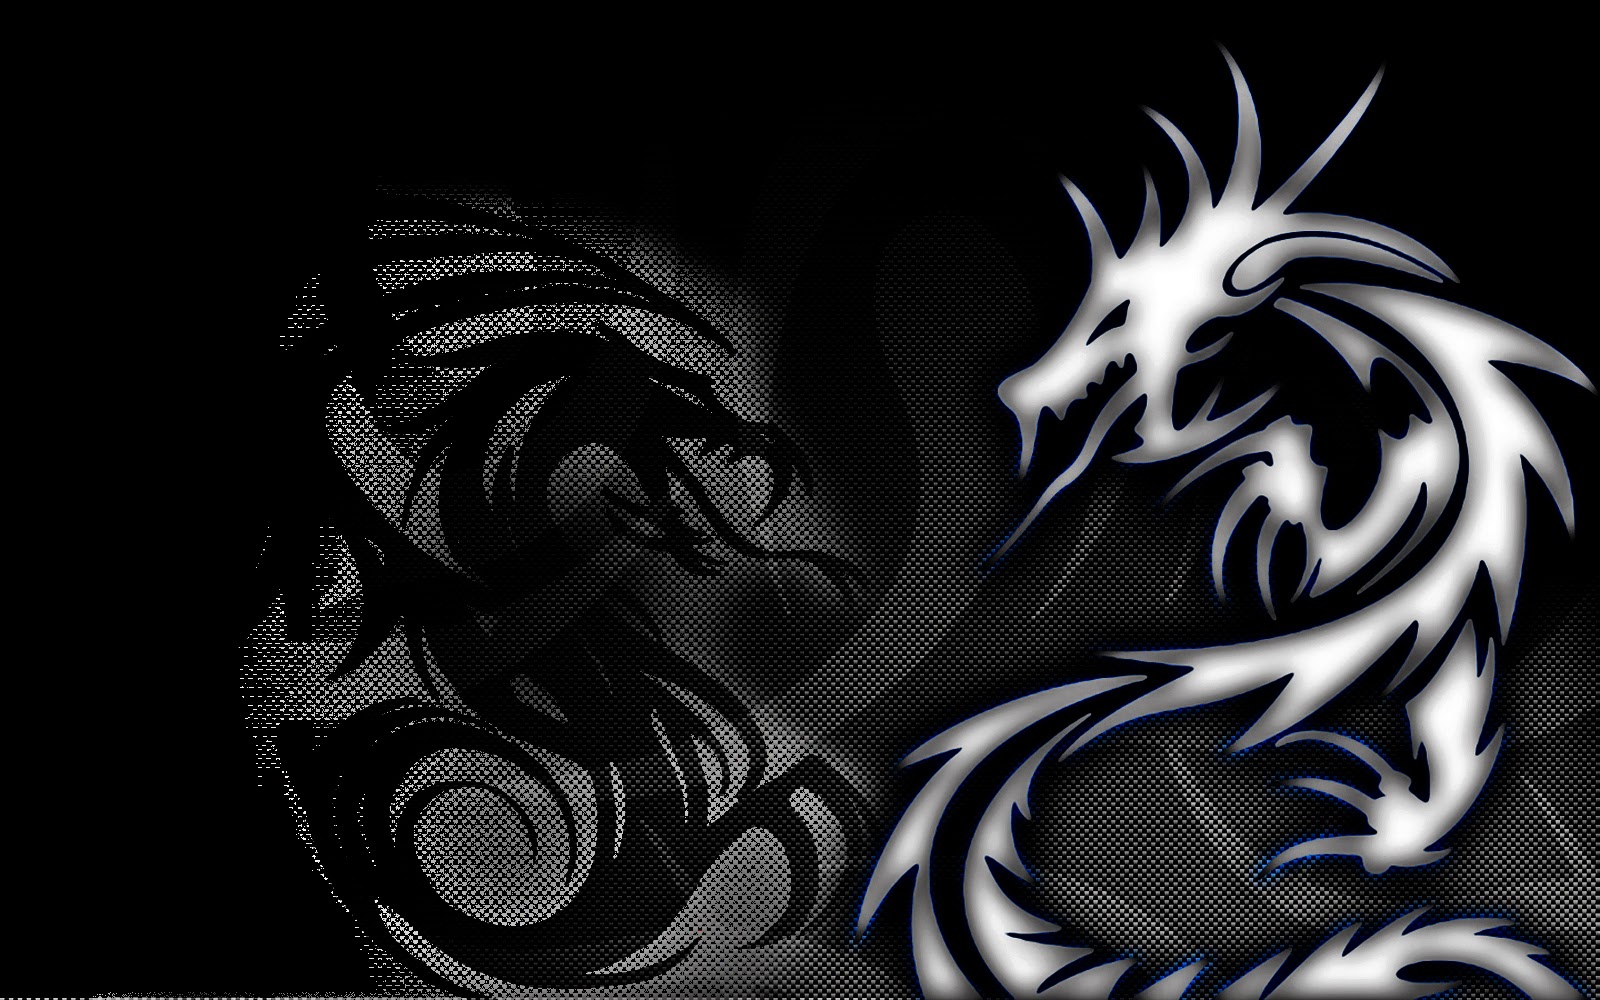 wallpaper anime keren untuk android,dragon,black and white,fictional character,graphic design,darkness